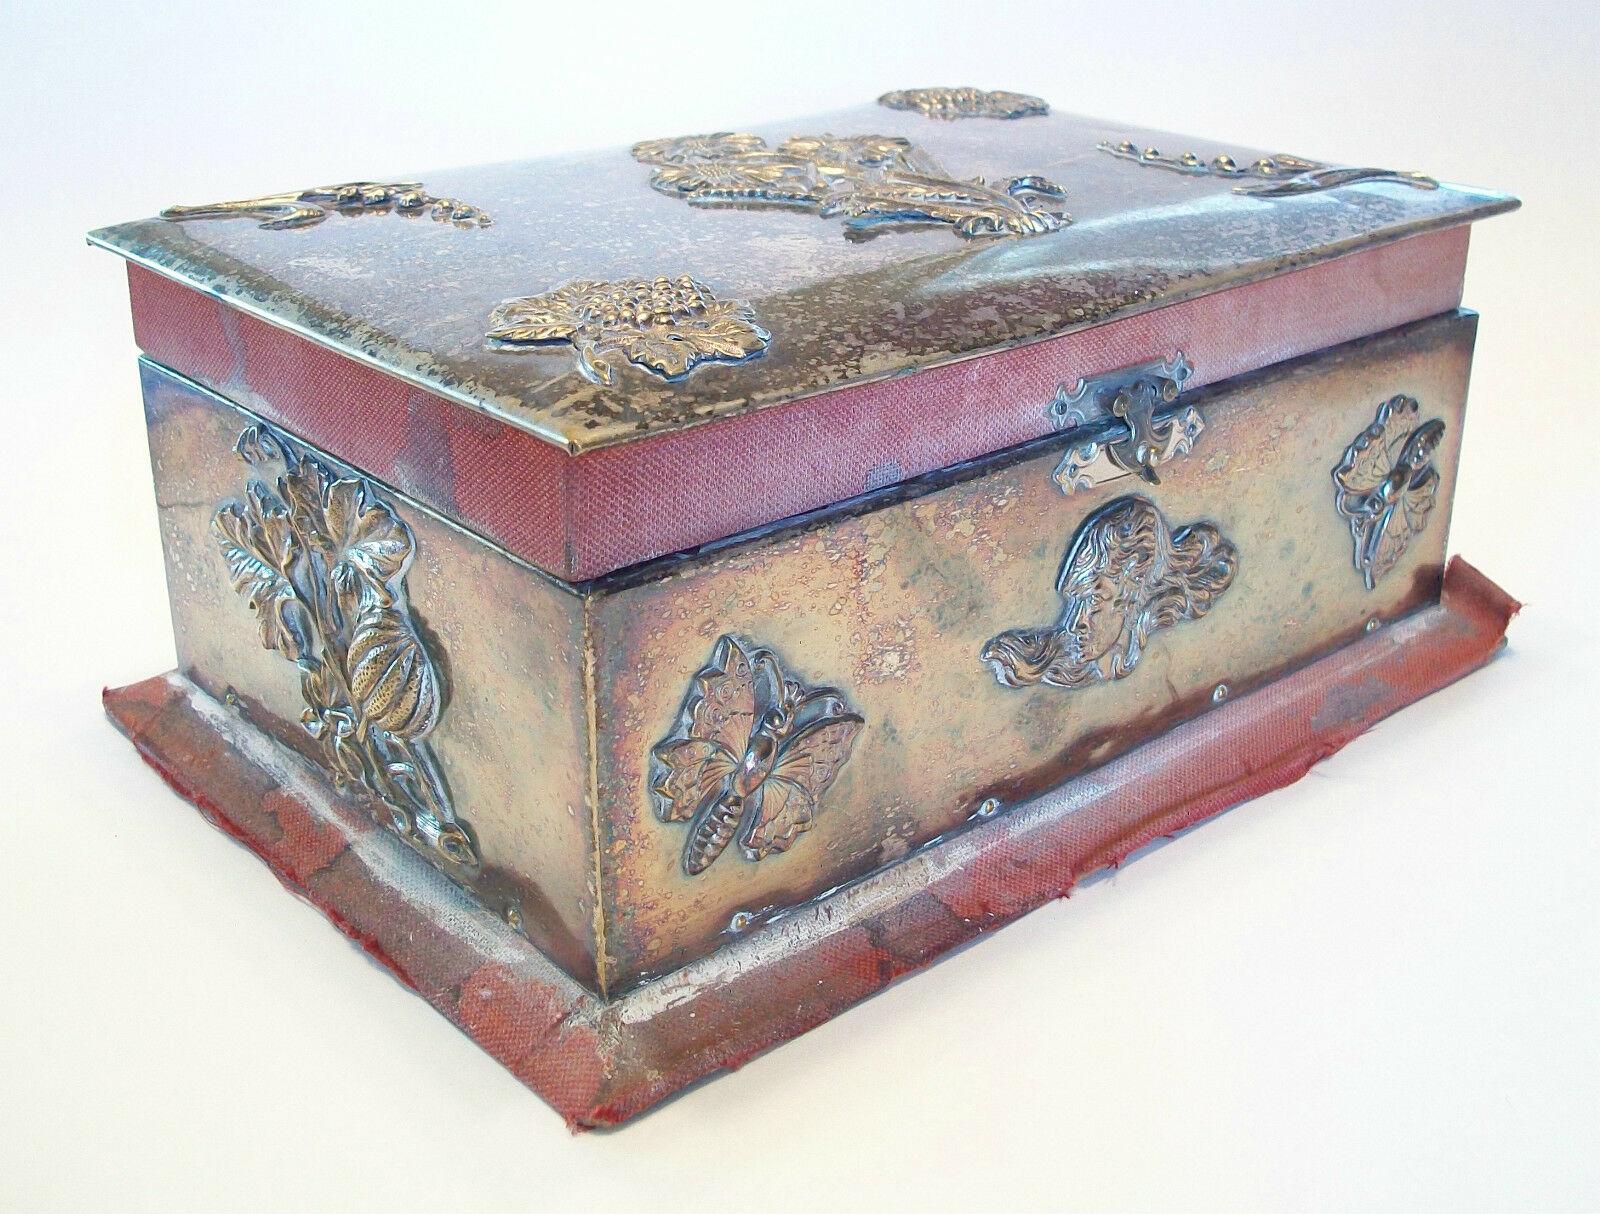 Antique Arts & Crafts metal clad jewelry box with applied decoration - remnants of velvet trim - silk lining - unsigned - United Kingdom (likely) - circa 1880.

Poor antique condition - surface scratches and minor dents that come with age and use -